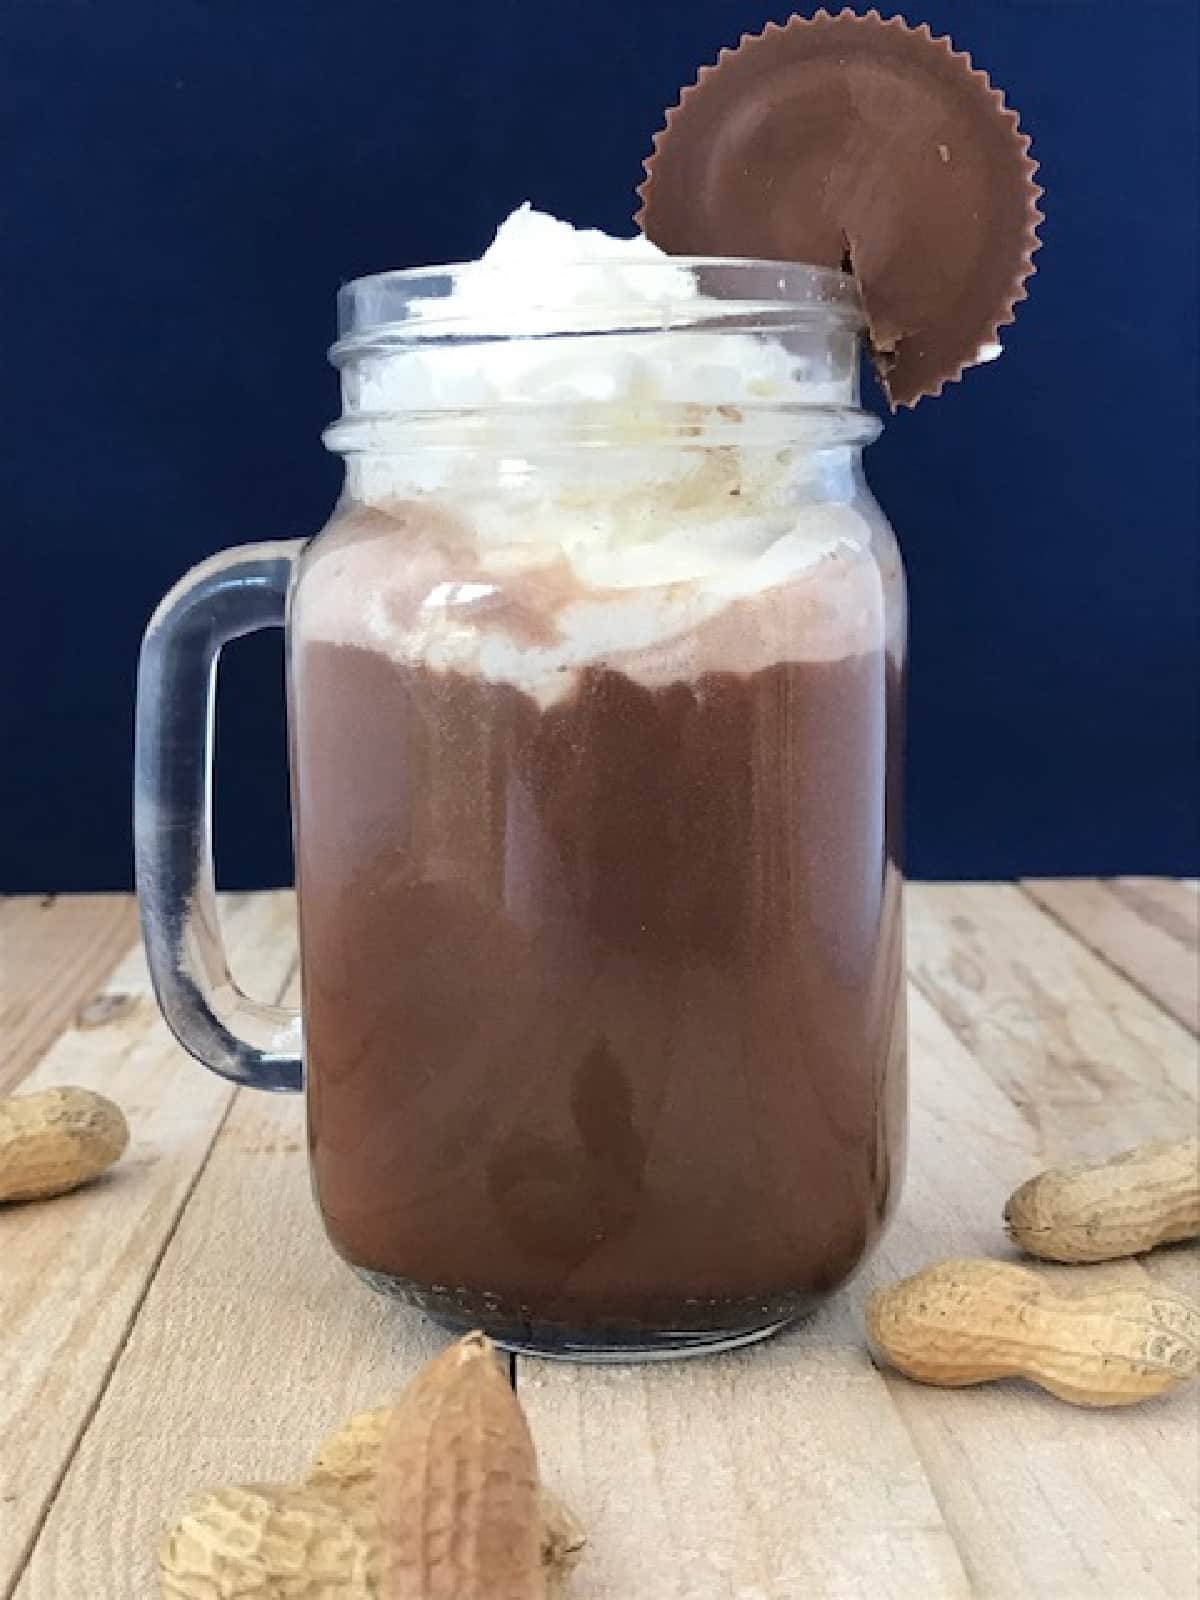 A glass mug of spiked peanut butter hot chocolate with whipped cream garnished with a Reese's peanut butter cup.